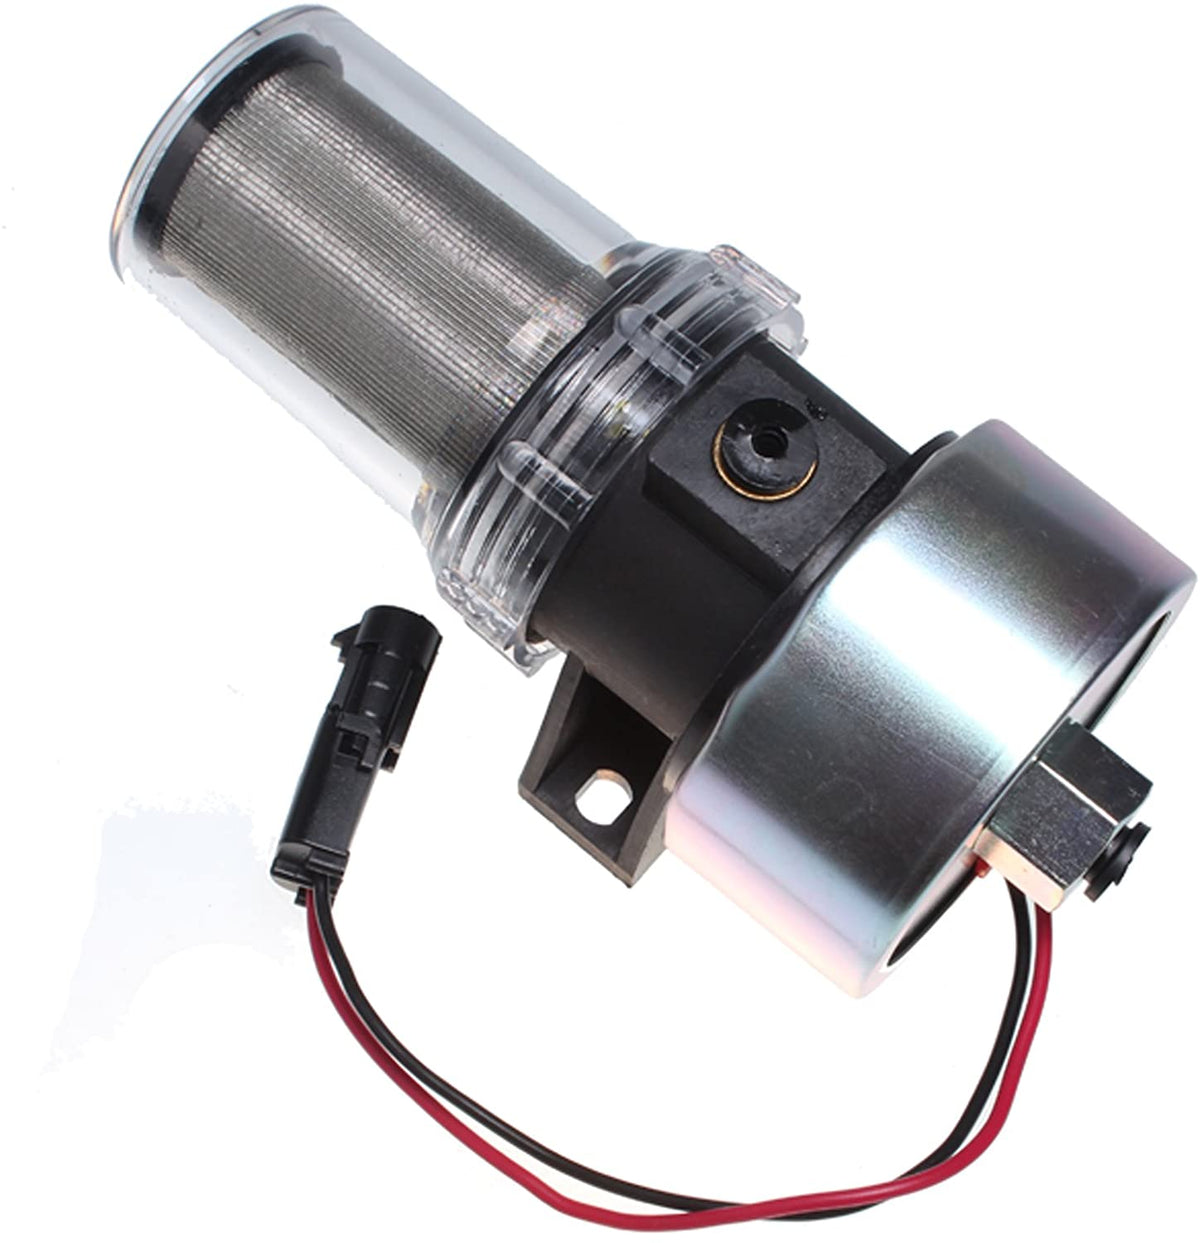 Fuel Pump 41-7059 for Thermo King MD KD RD TS URD XDS TD LND Units - KUDUPARTS